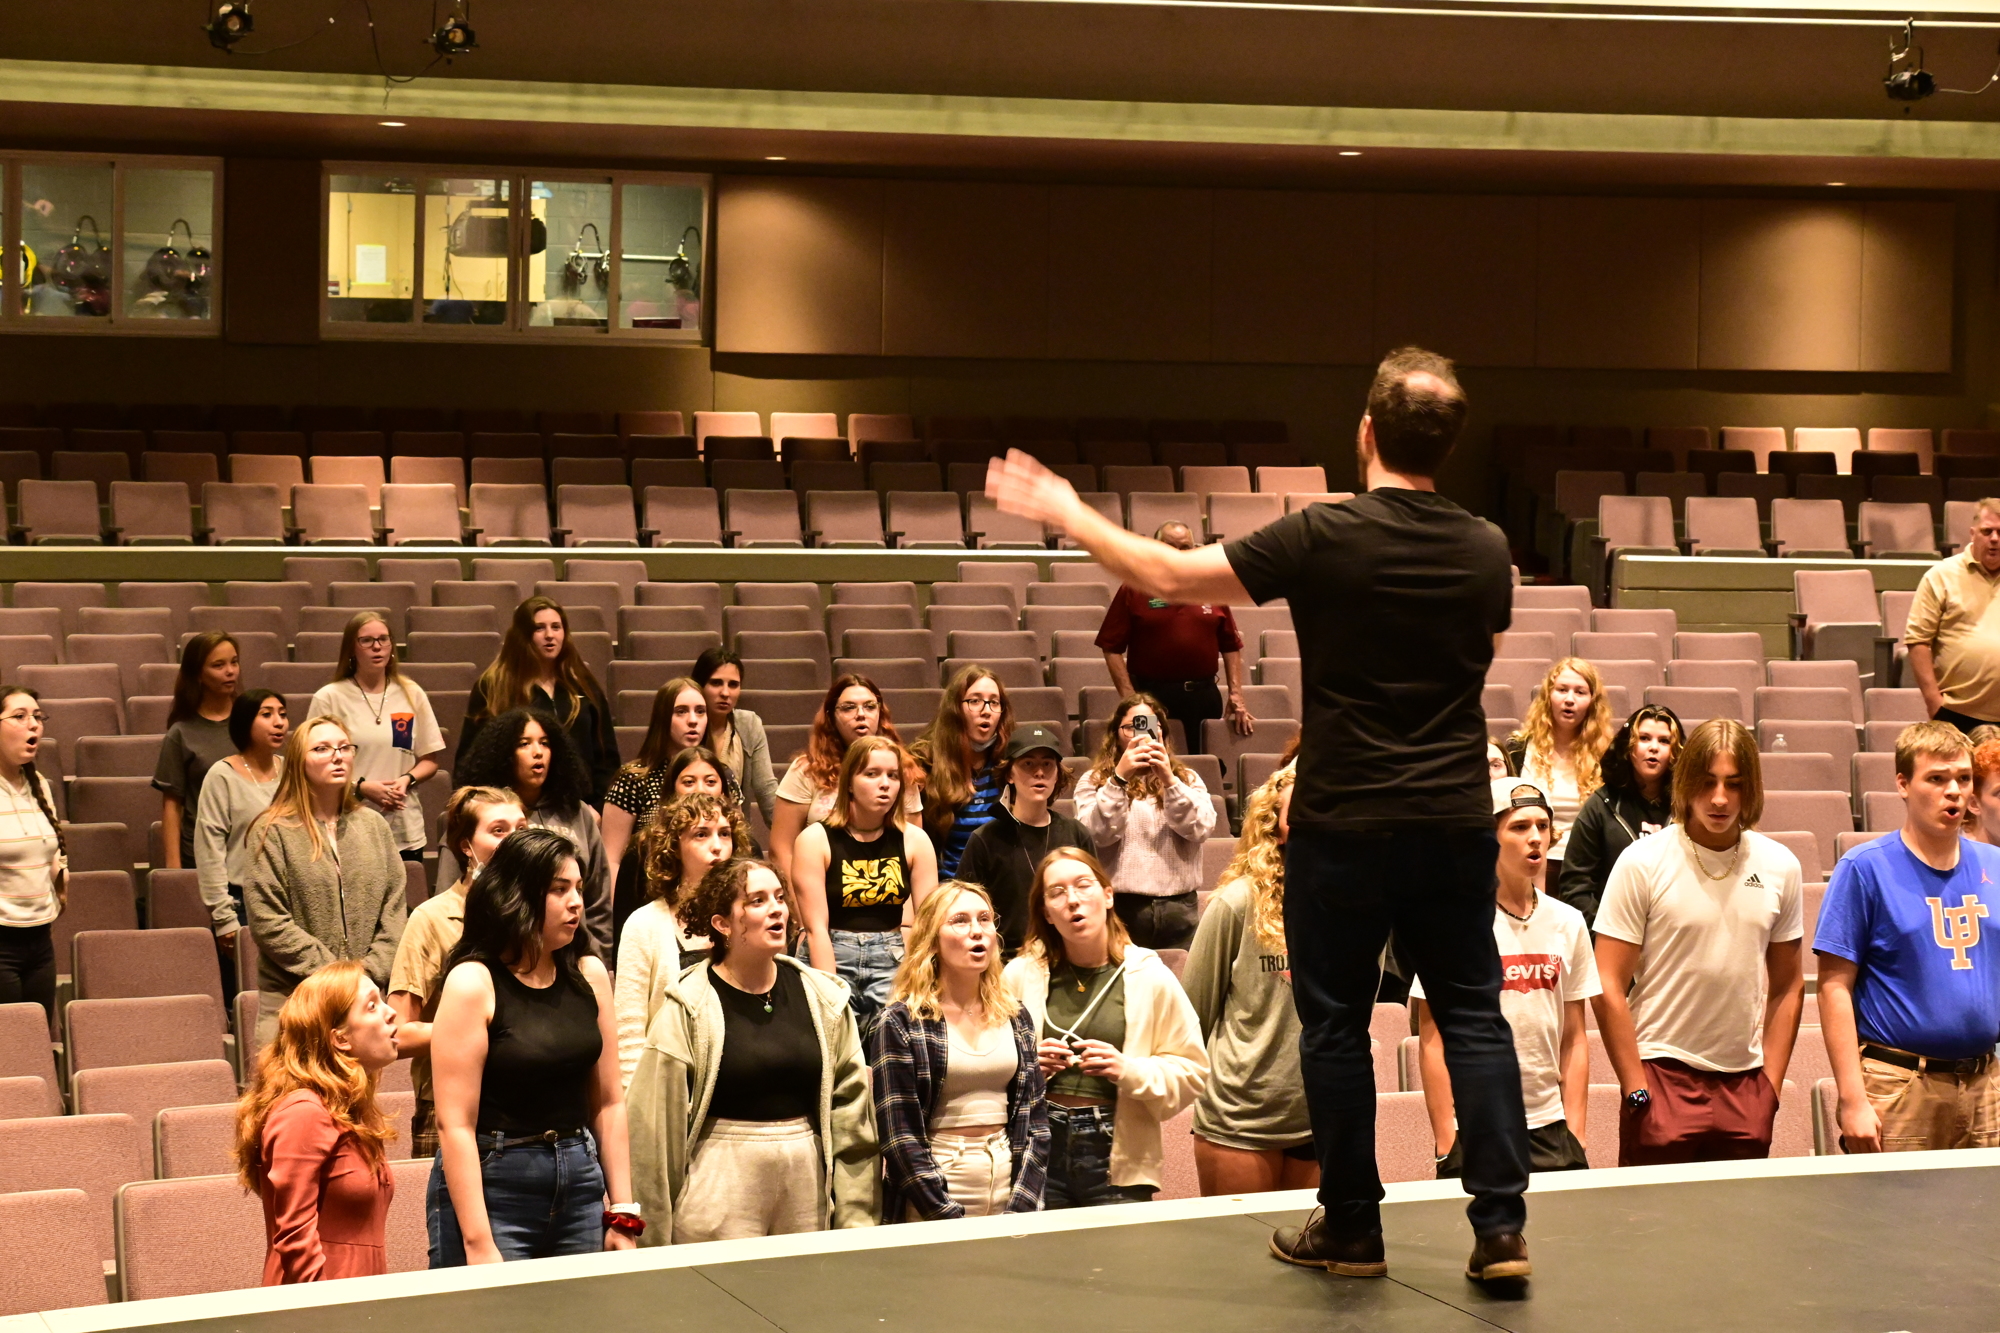 Jonny Moroni of Vocal Spectrum leads the Riverview students in a singing exercise. (Photo: Spencer Fordin)